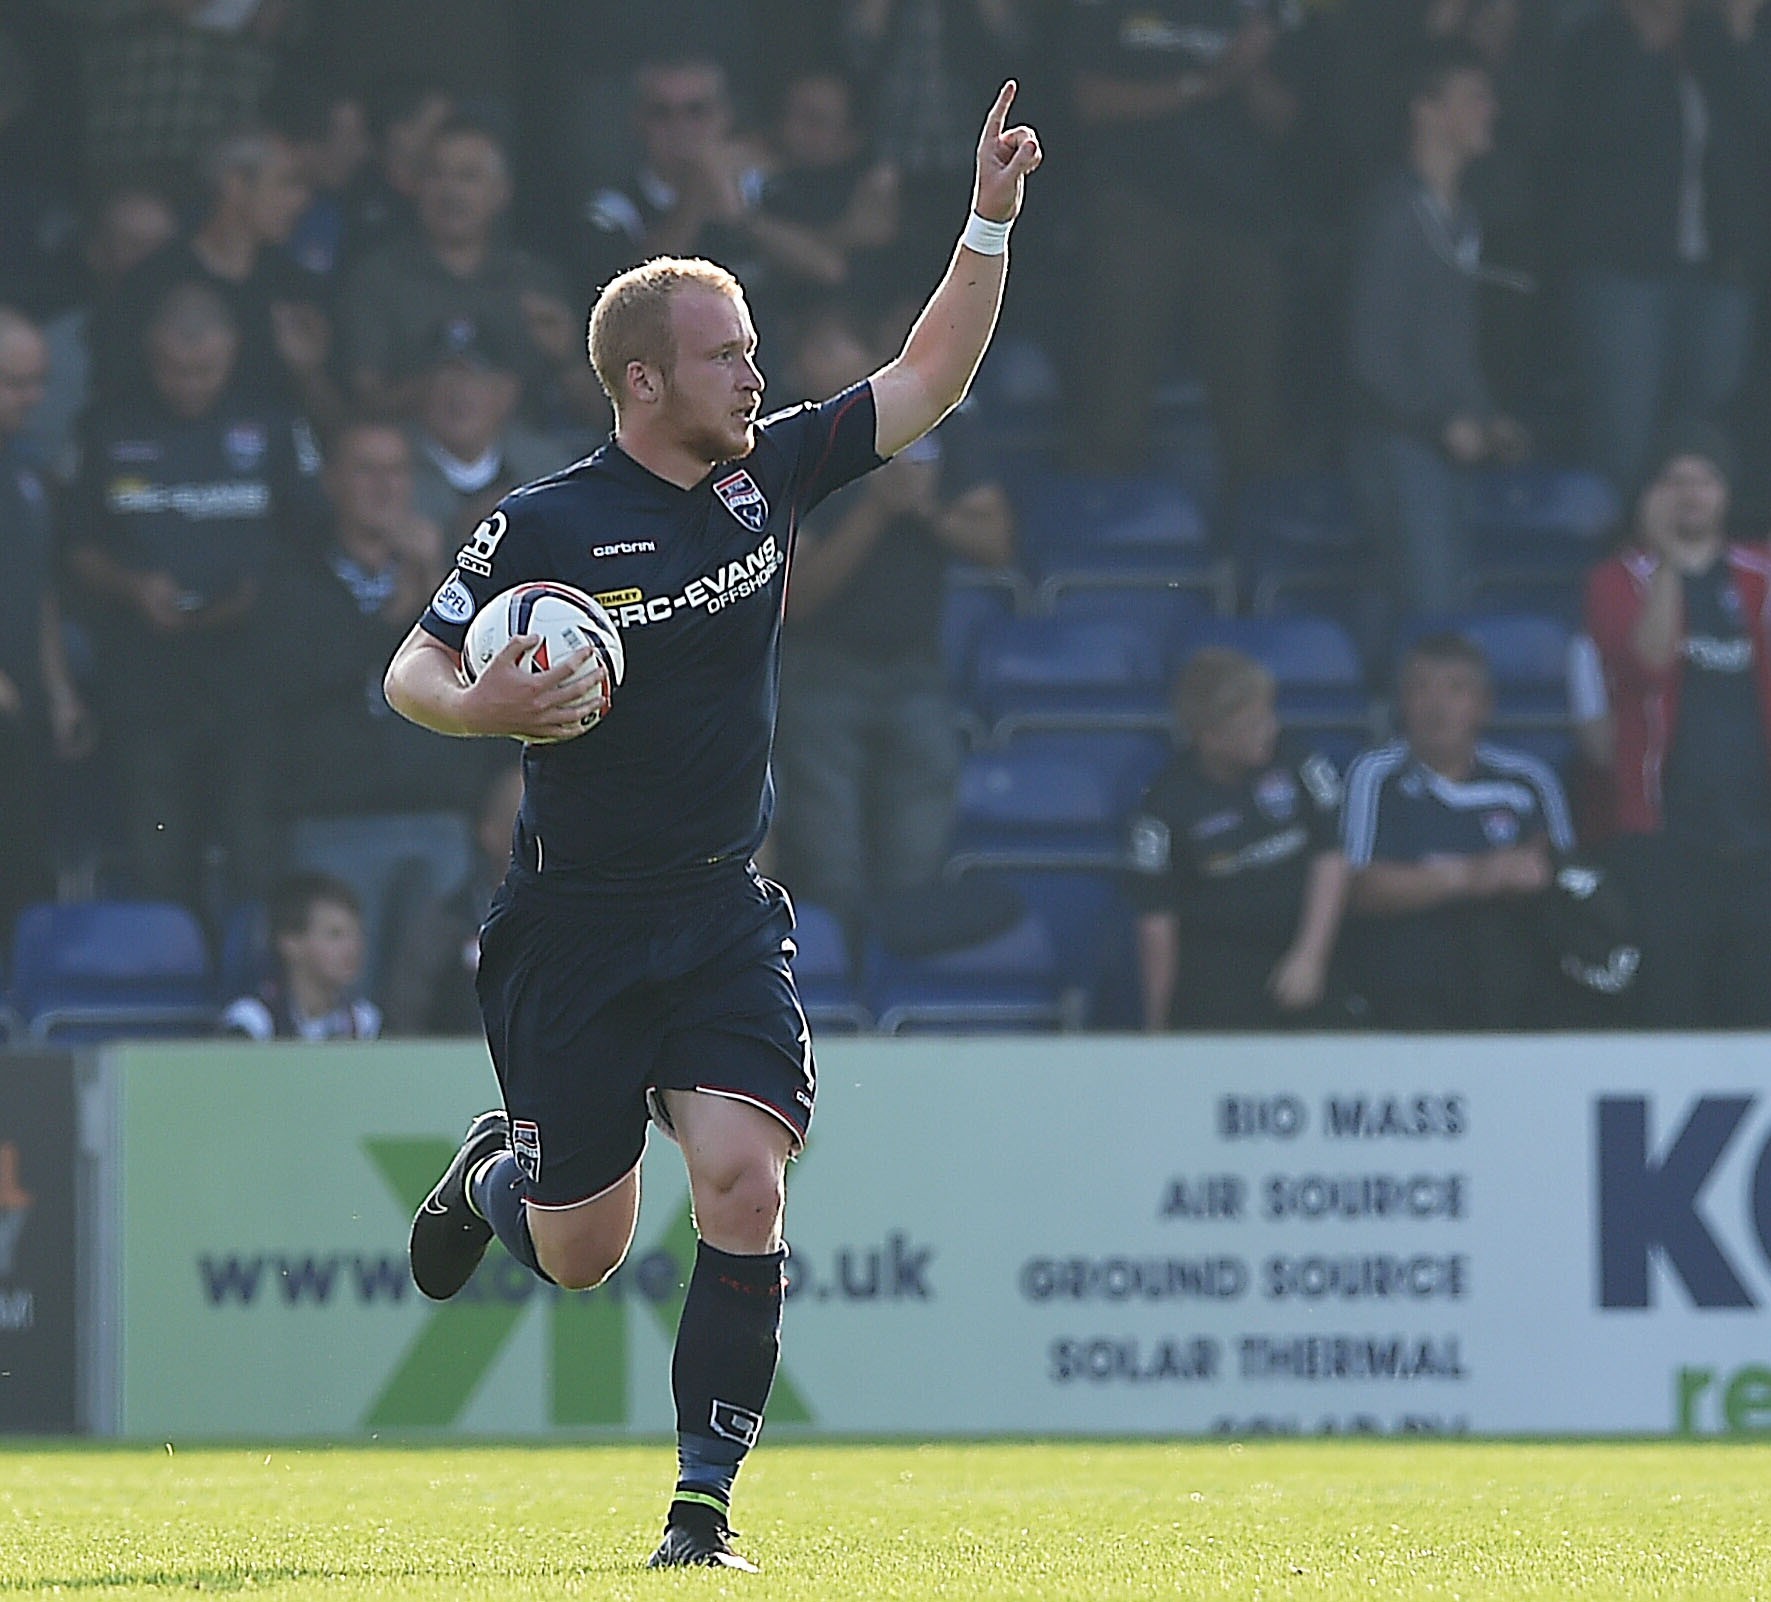 Boyce has netted some crucial goals for the Staggies this season